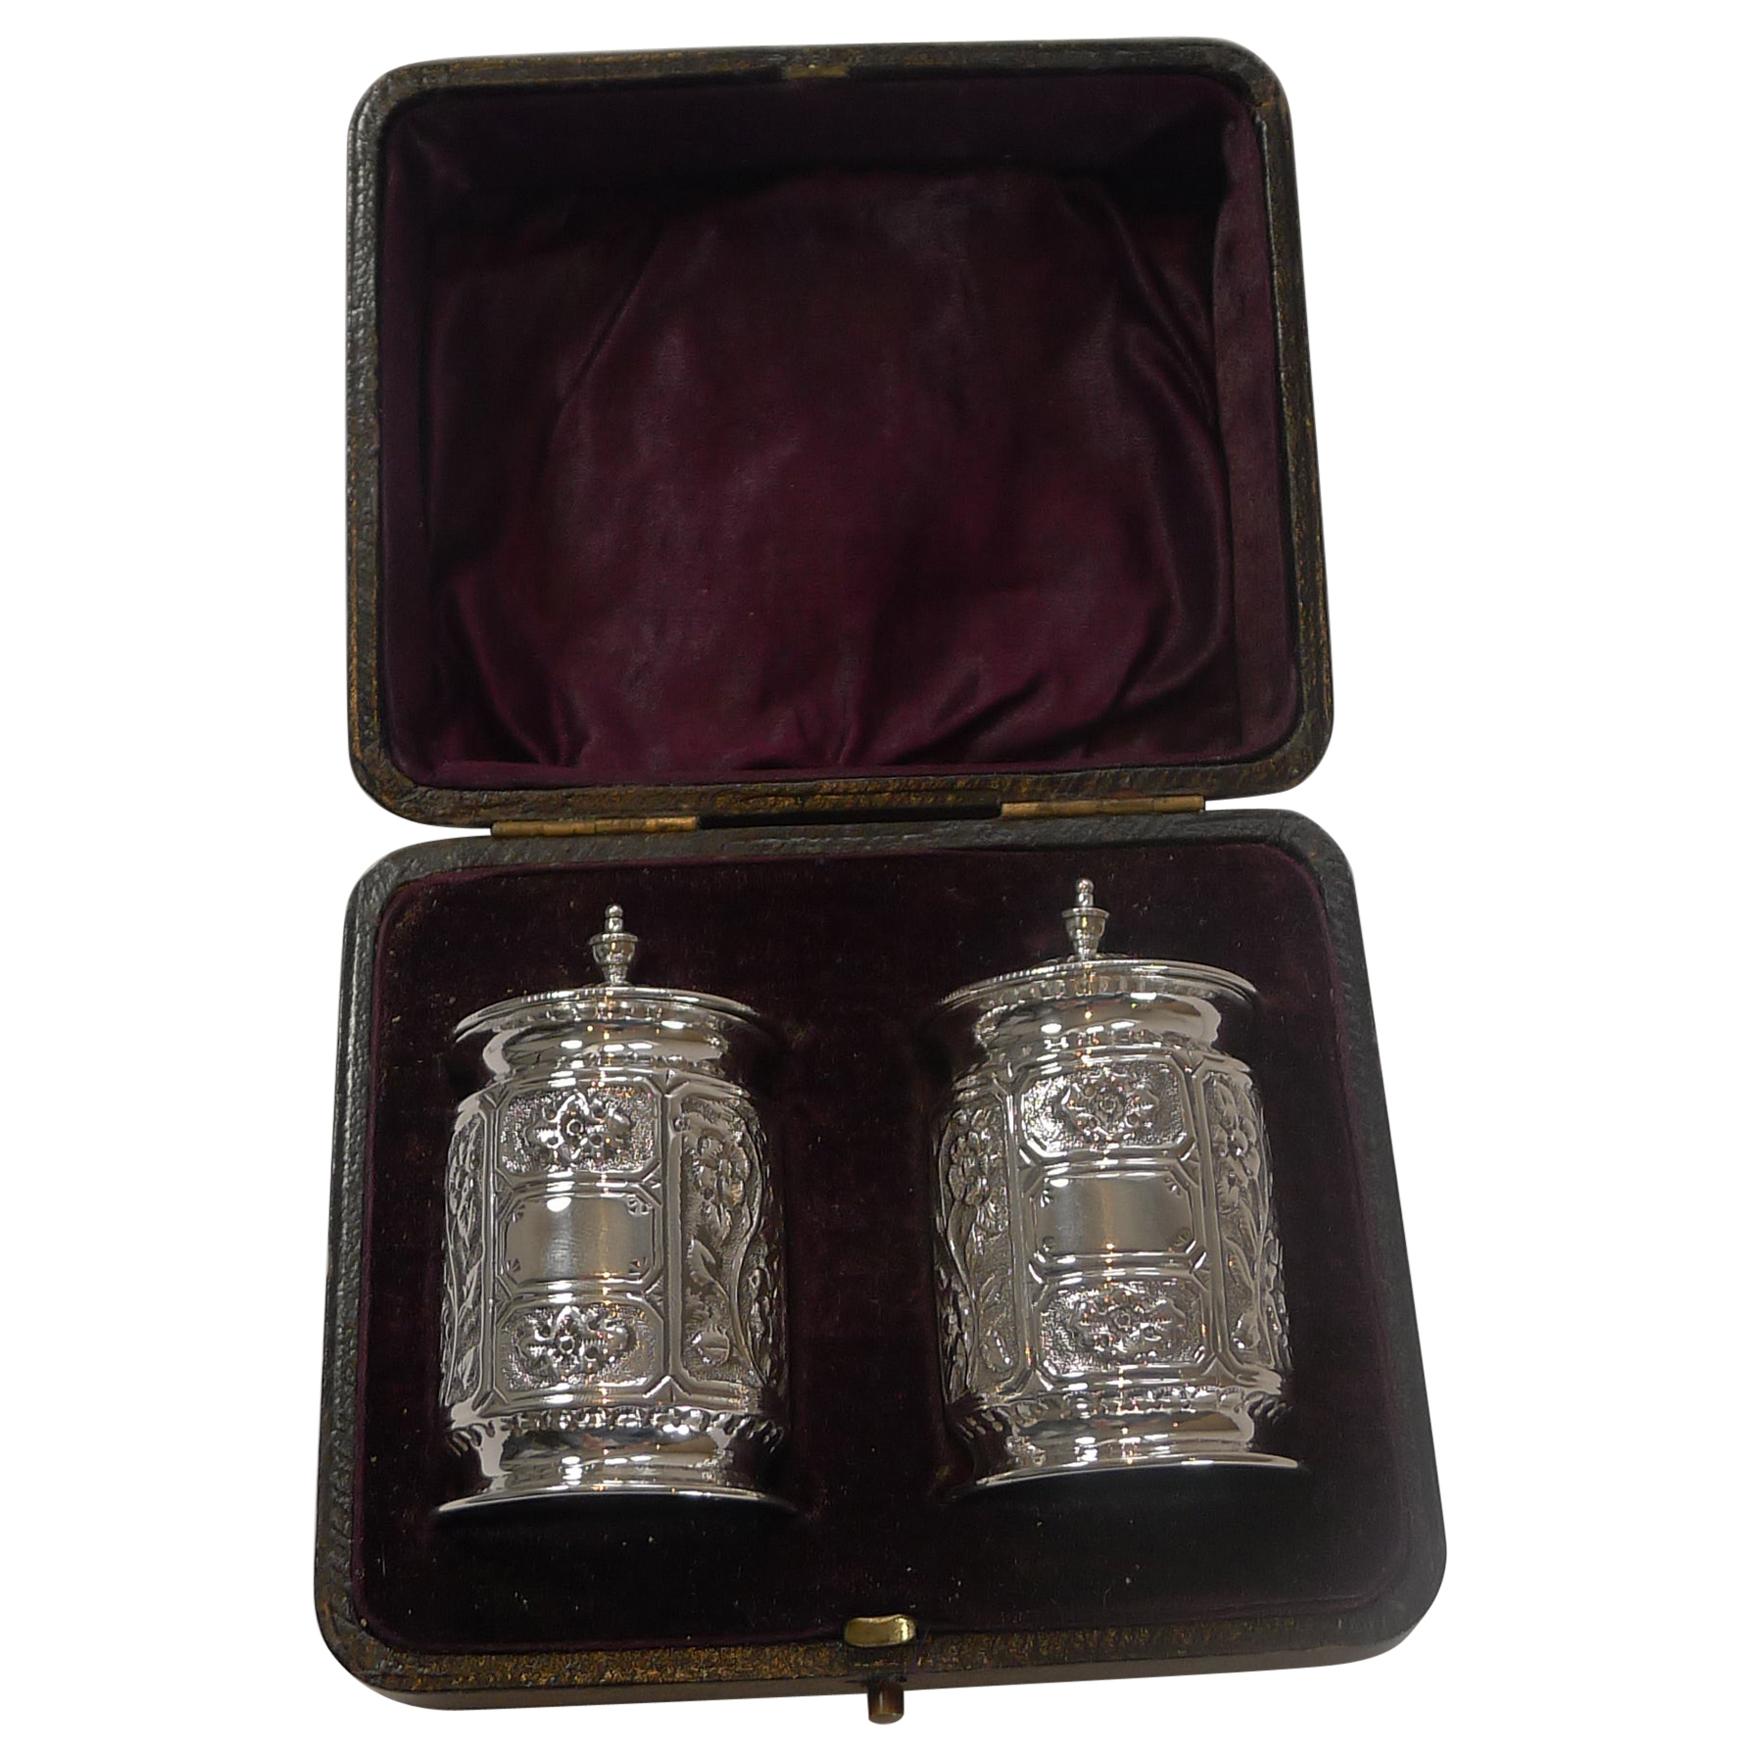 Boxed Pair of Antique English Sterling Silver Pepper Pots, 1894